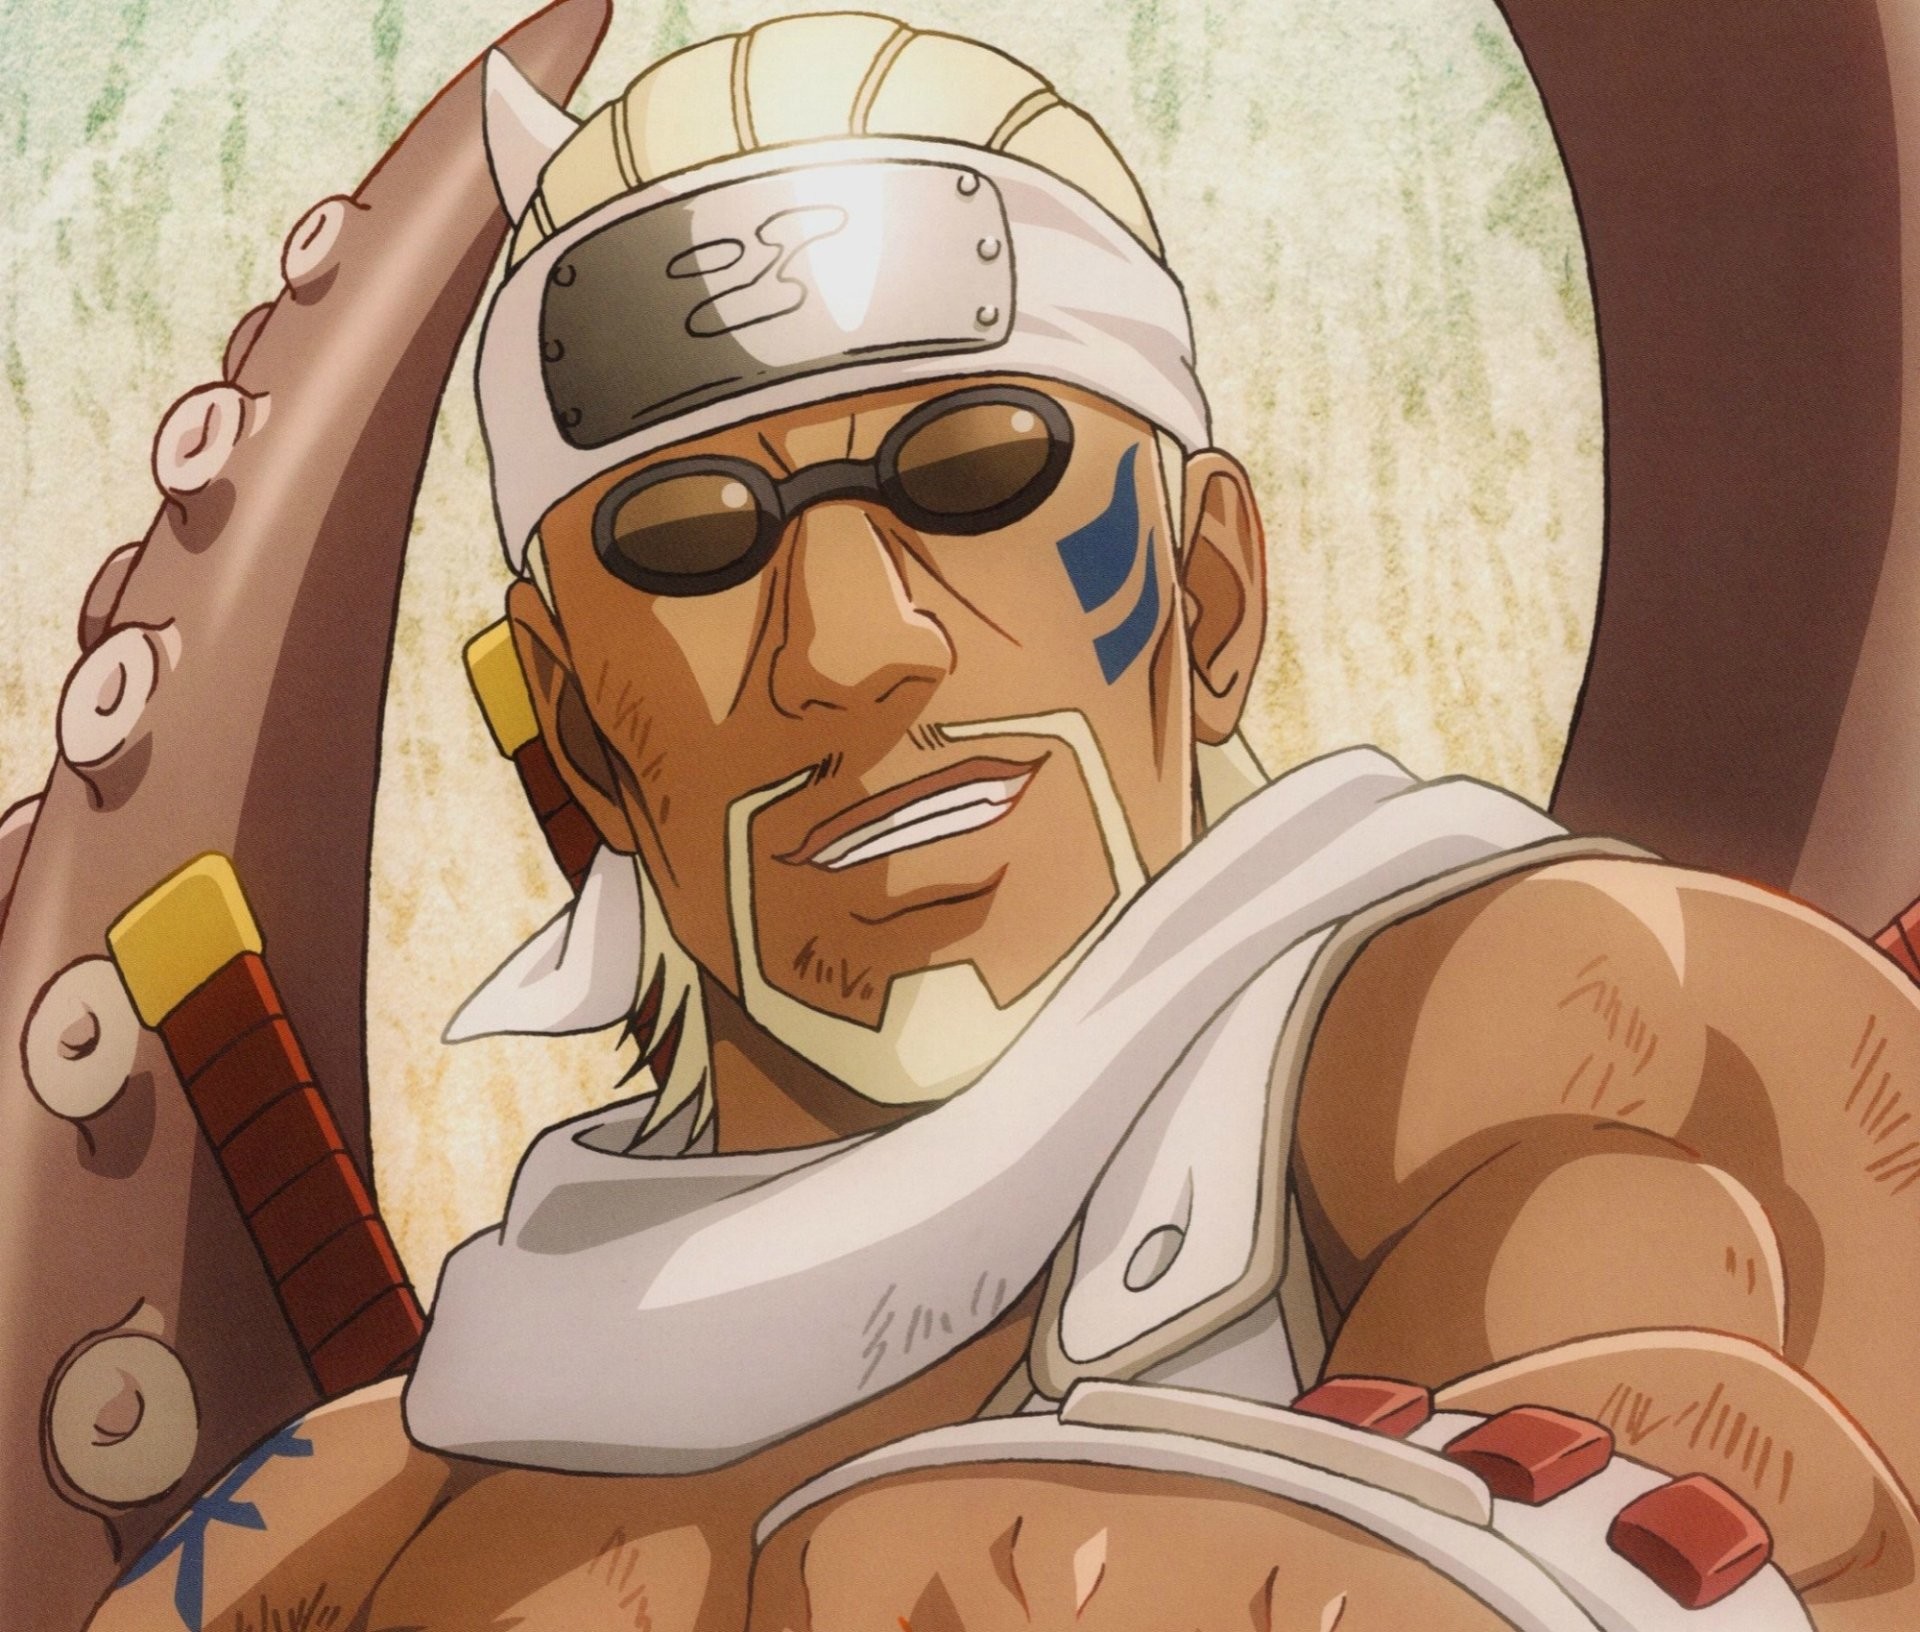 A close-up of a man with a white headband, sunglasses, and a scarred face. He is wearing a white tank top and has a robotic arm. - Bee